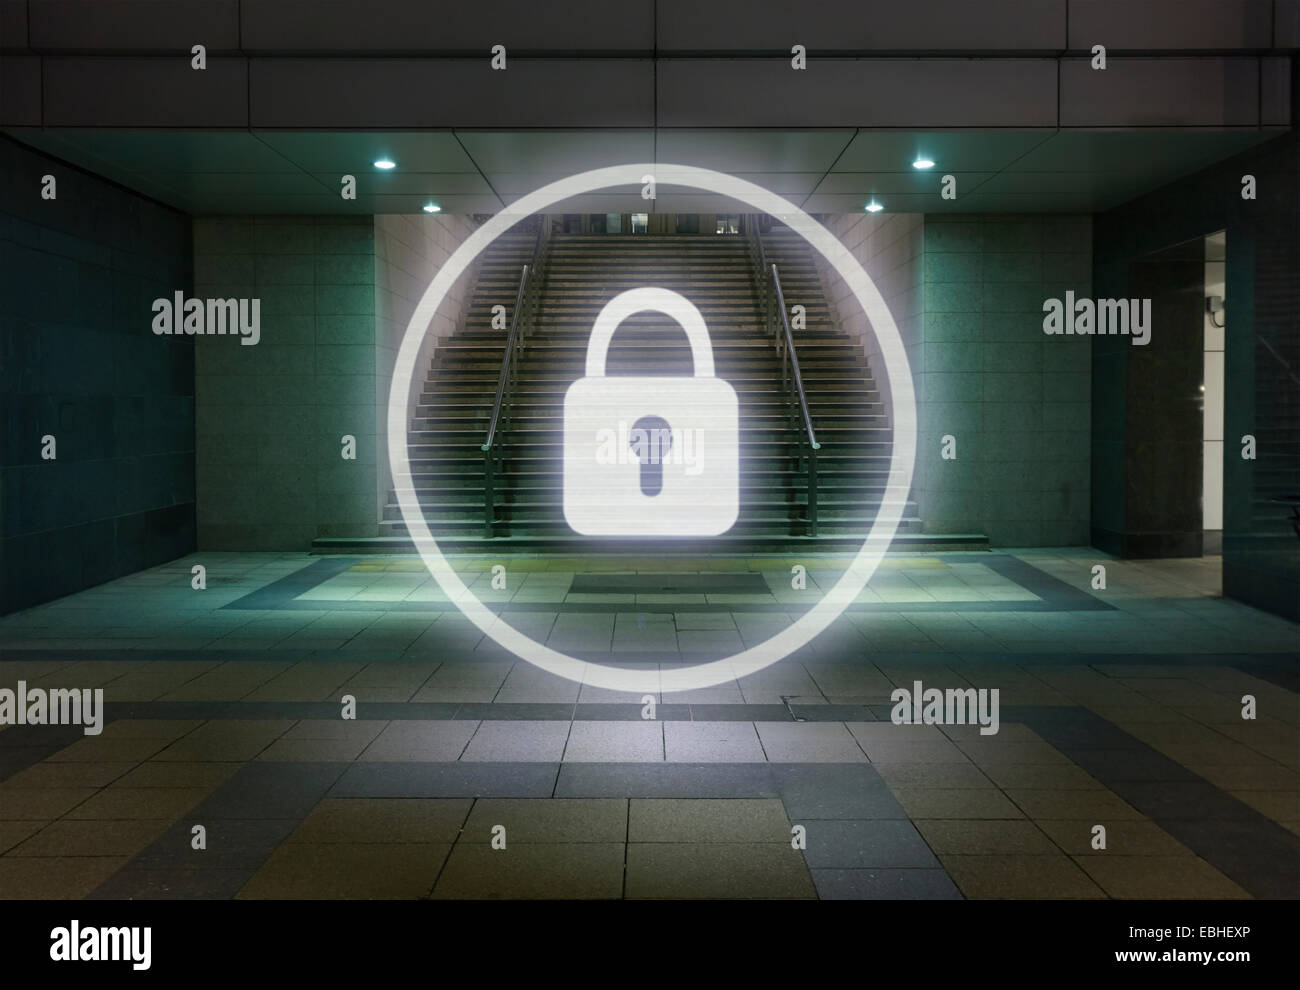 Glowing padlock symbol in office building foyer at night Stock Photo